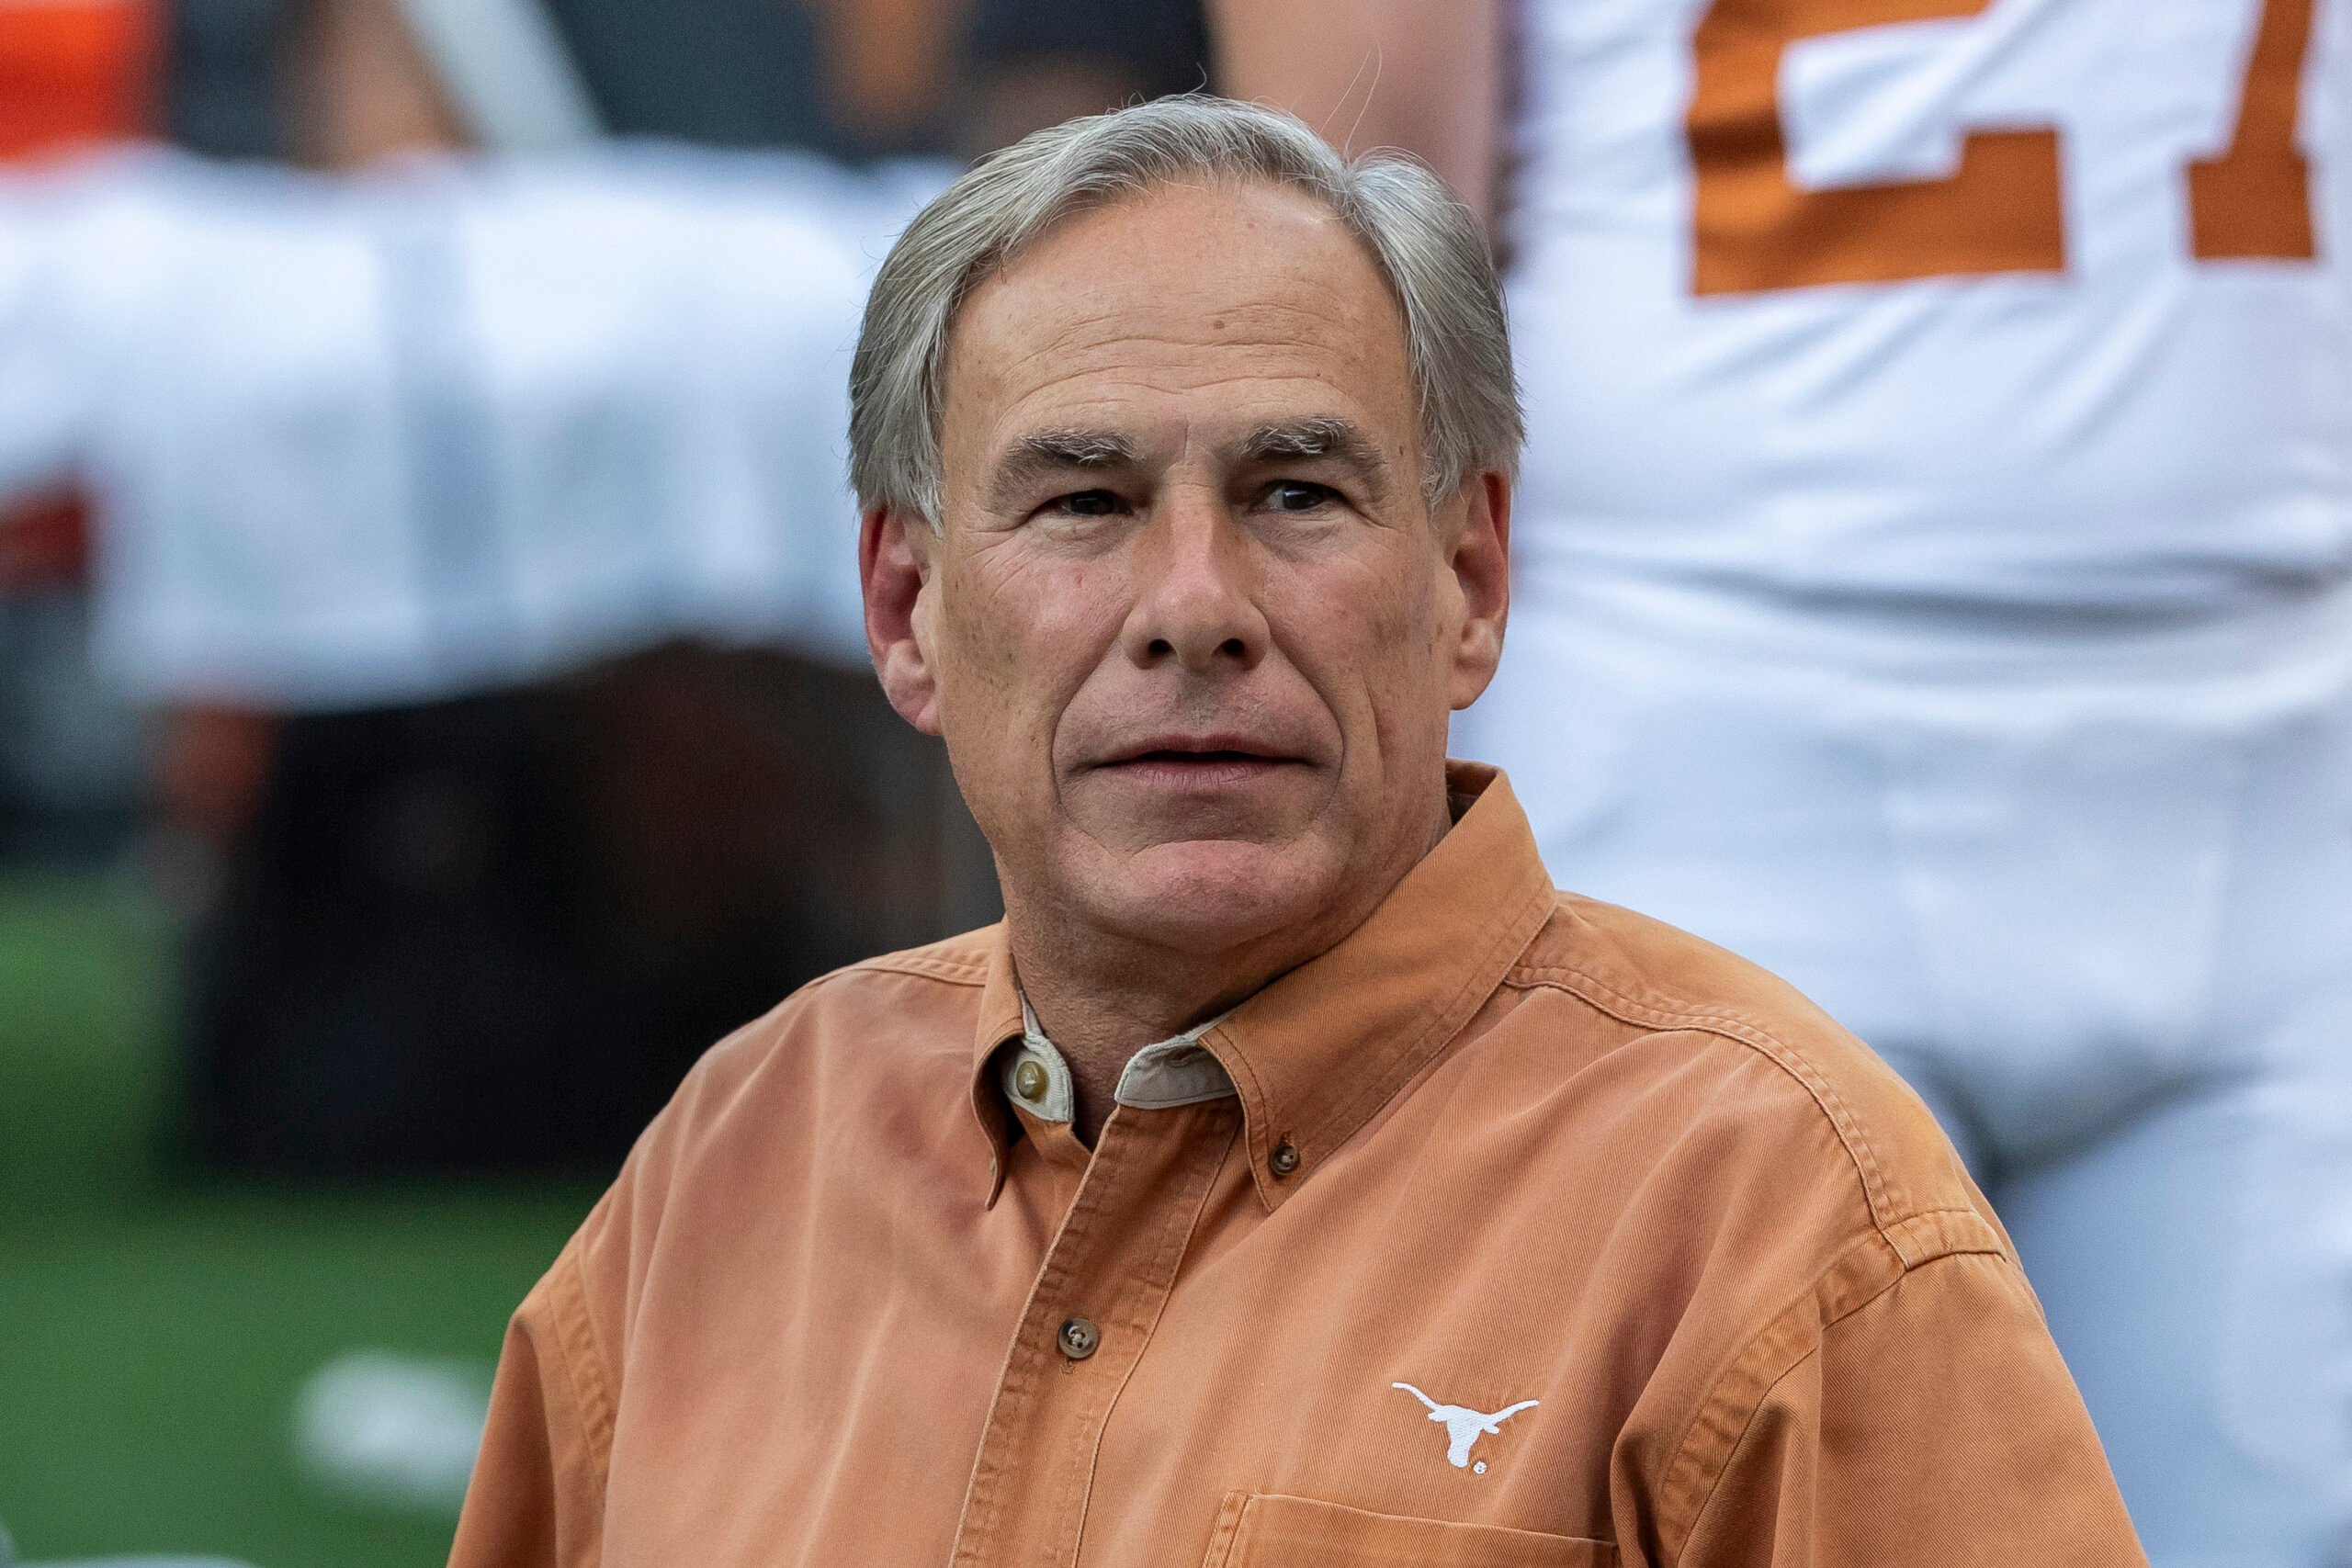 Governor Greg Abbott in an orange button-down with a longhorns logo